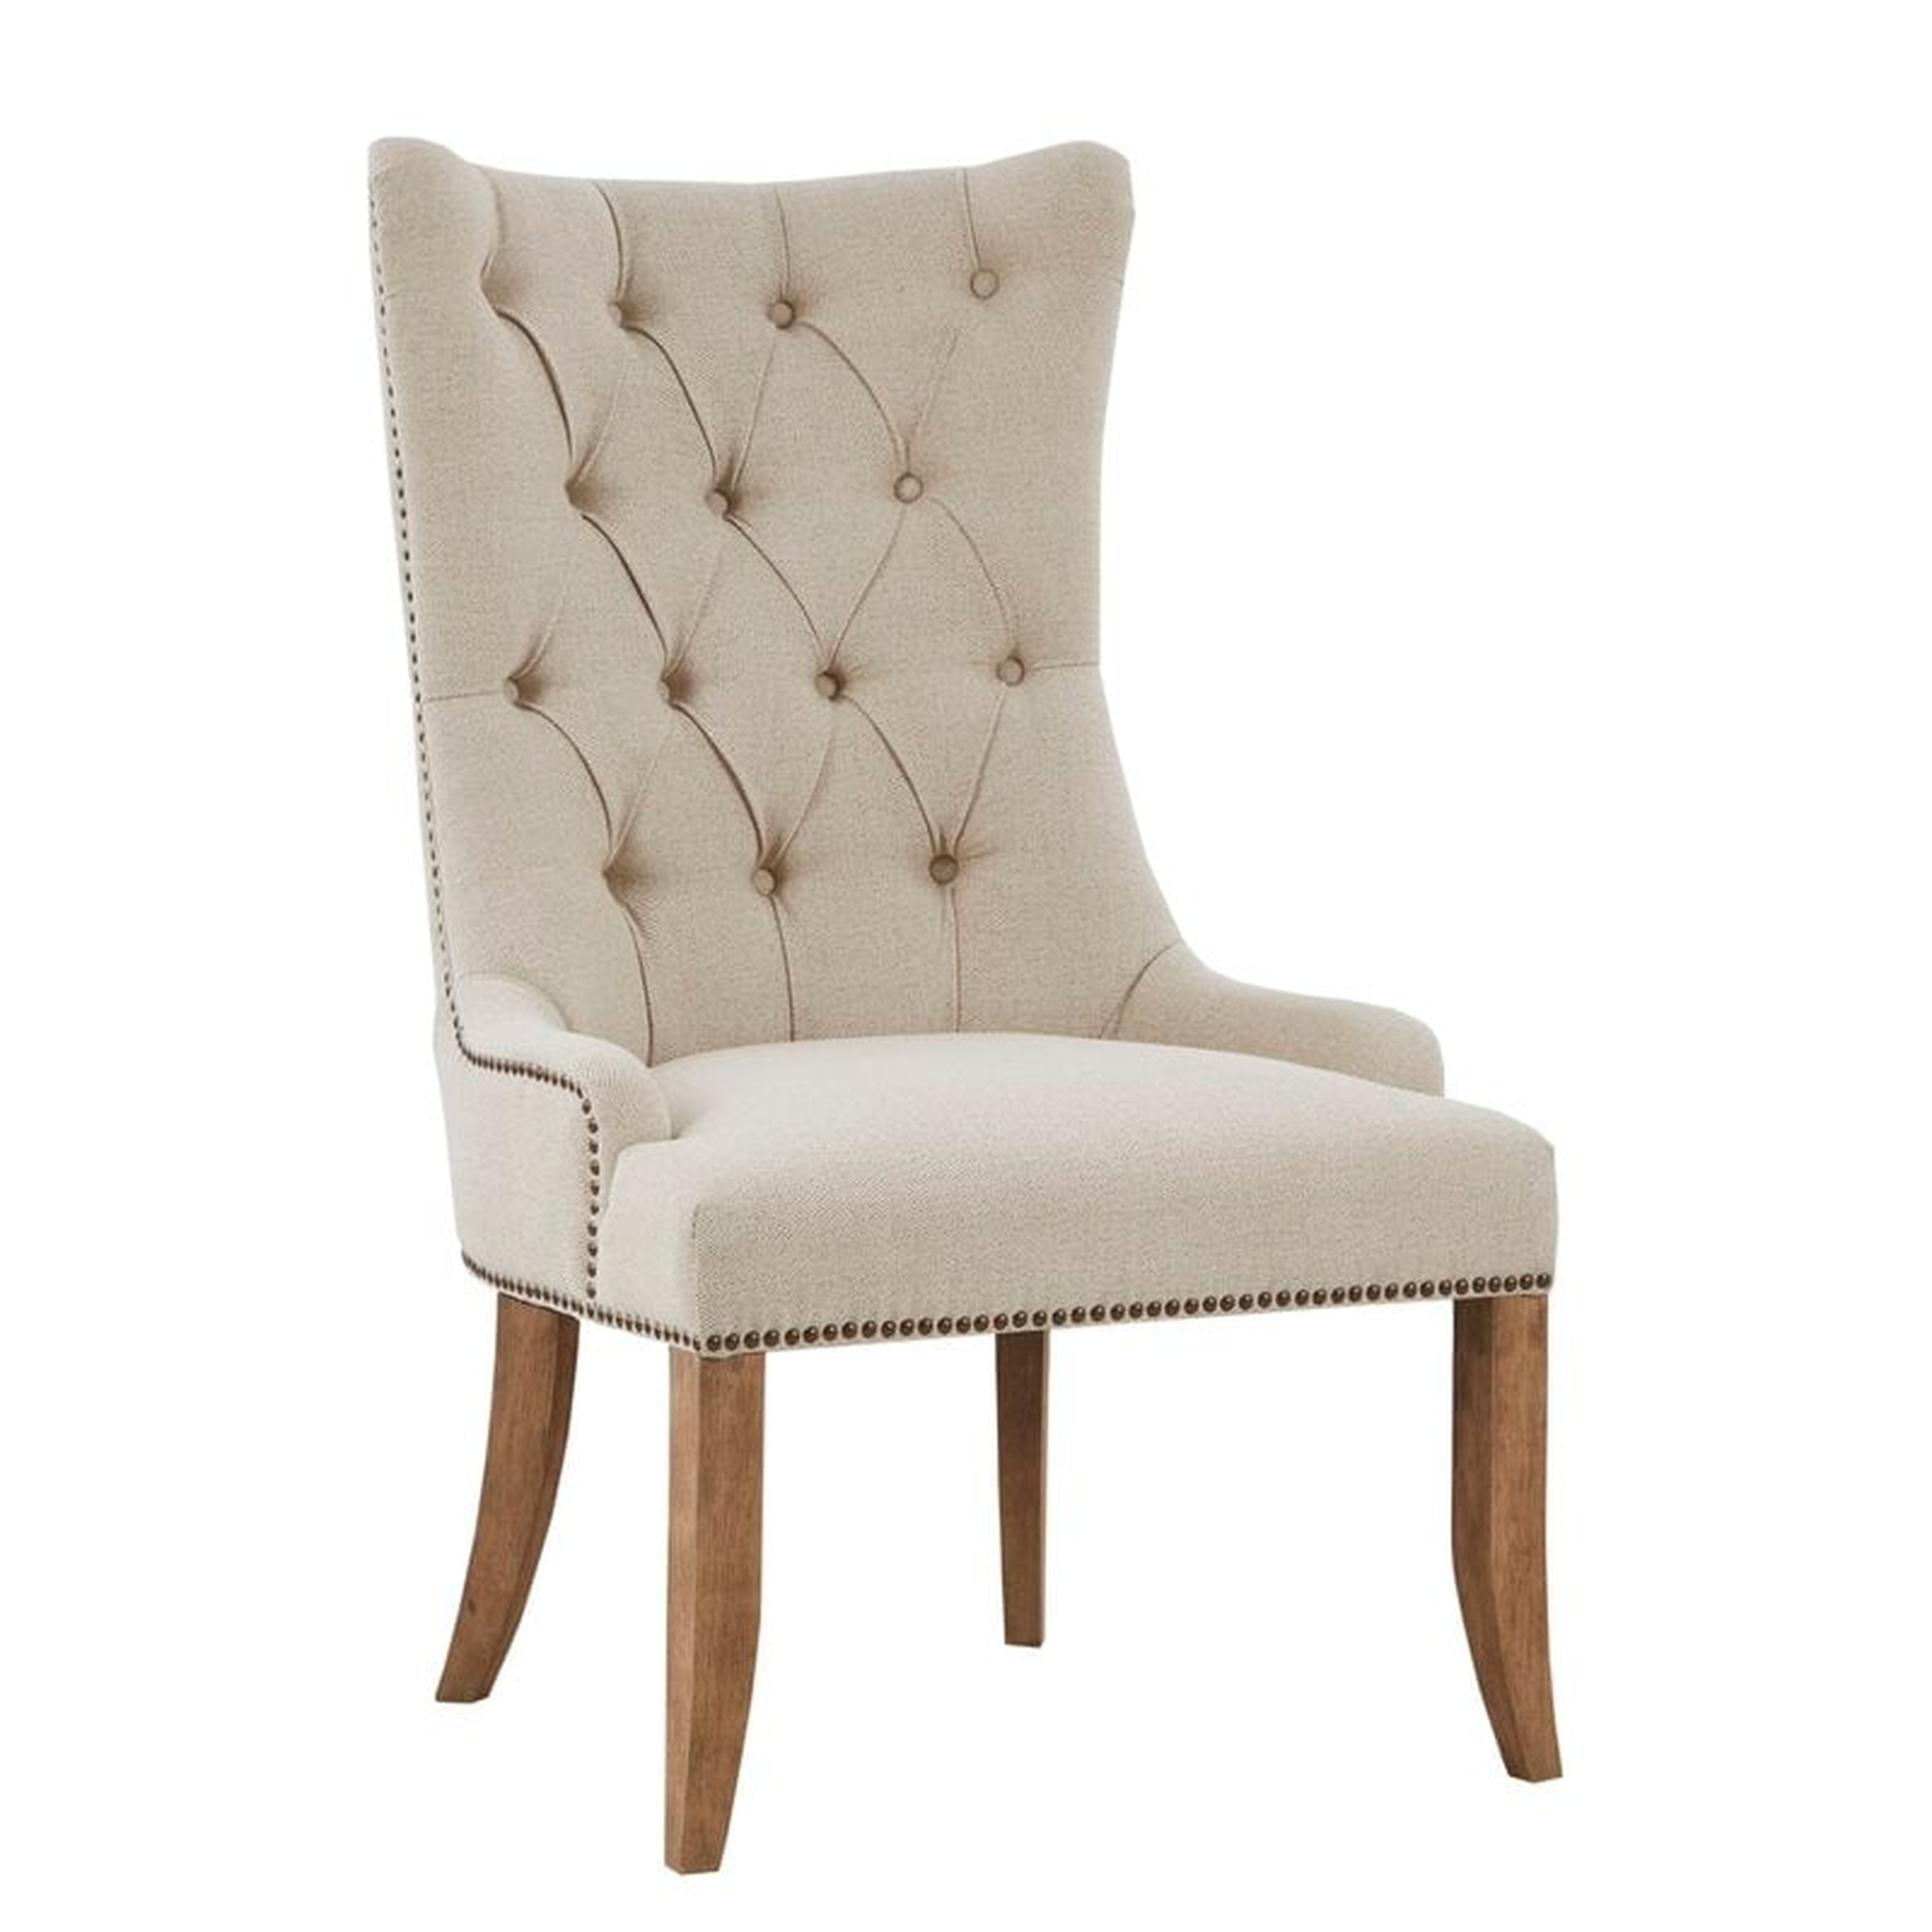 Garnica Tufted Upholstered Wingback Arm Chair in Cream - Wayfair